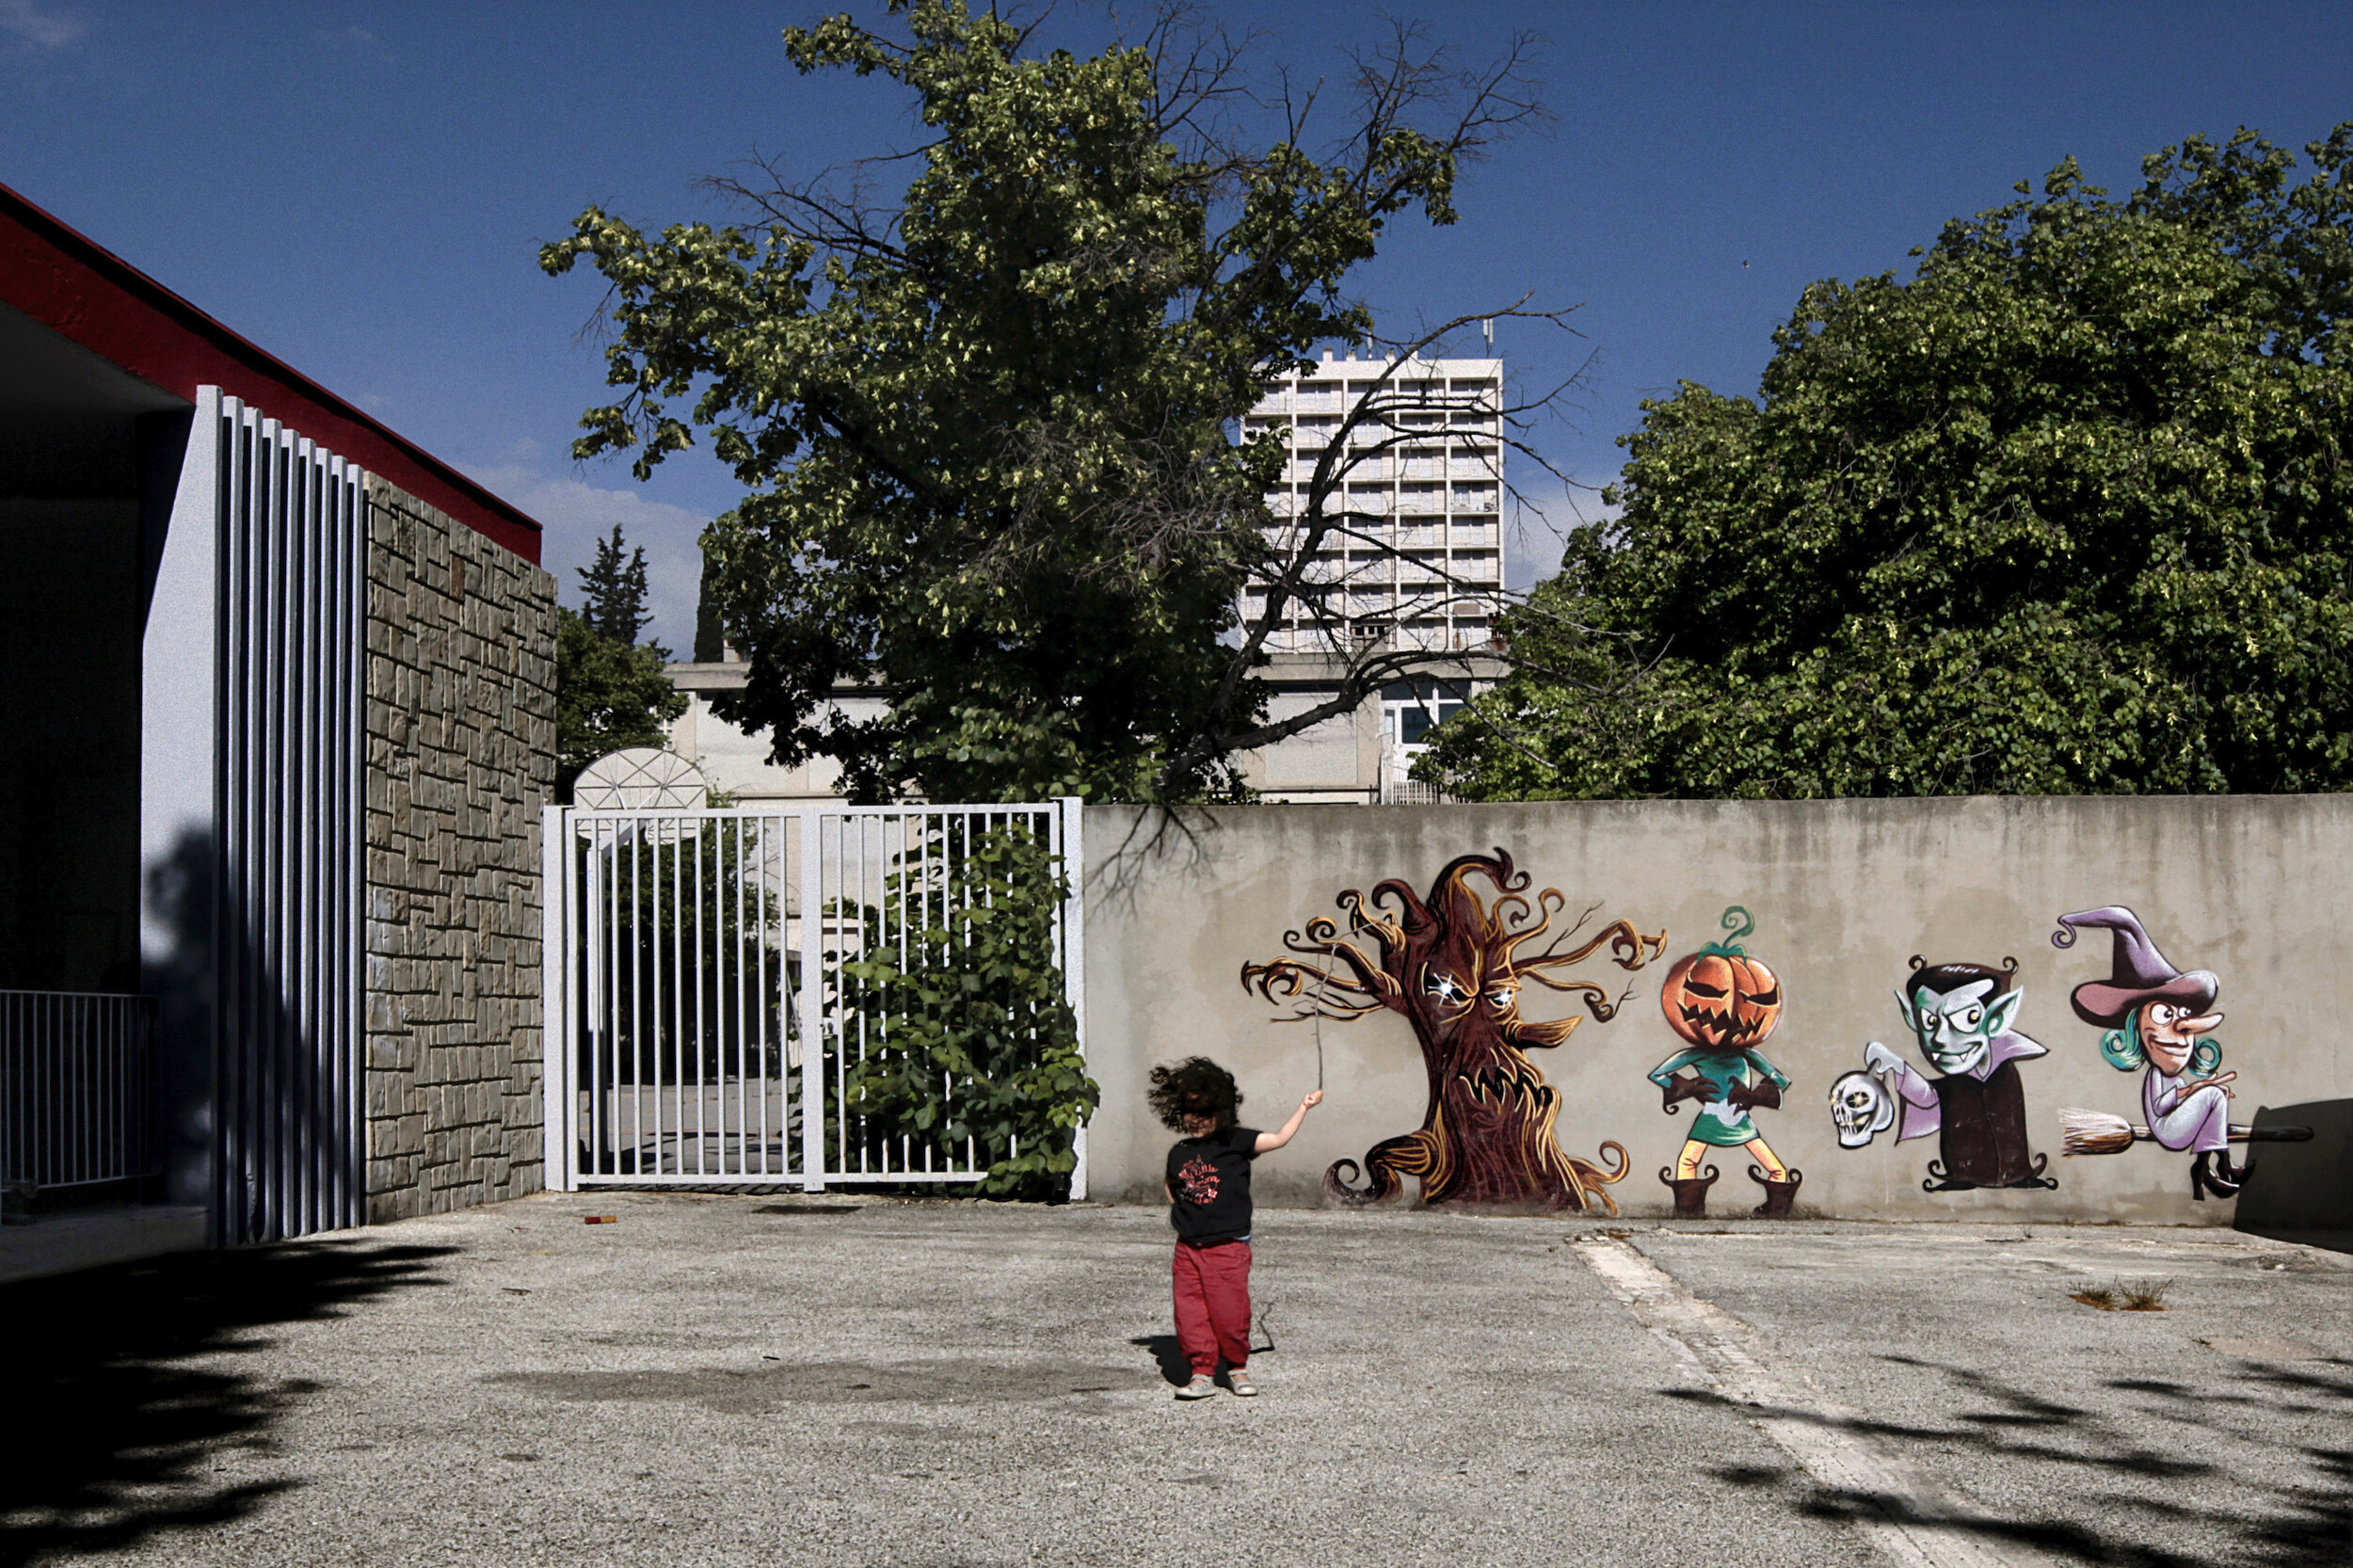   France. Marseille. 2014. A child plays in the courtyard of Agora Centre, a social development organization located in quartier Busserine, 14th arrondissement of Marseille. For a number of reasons, including high crime and violence, Busserine and ne